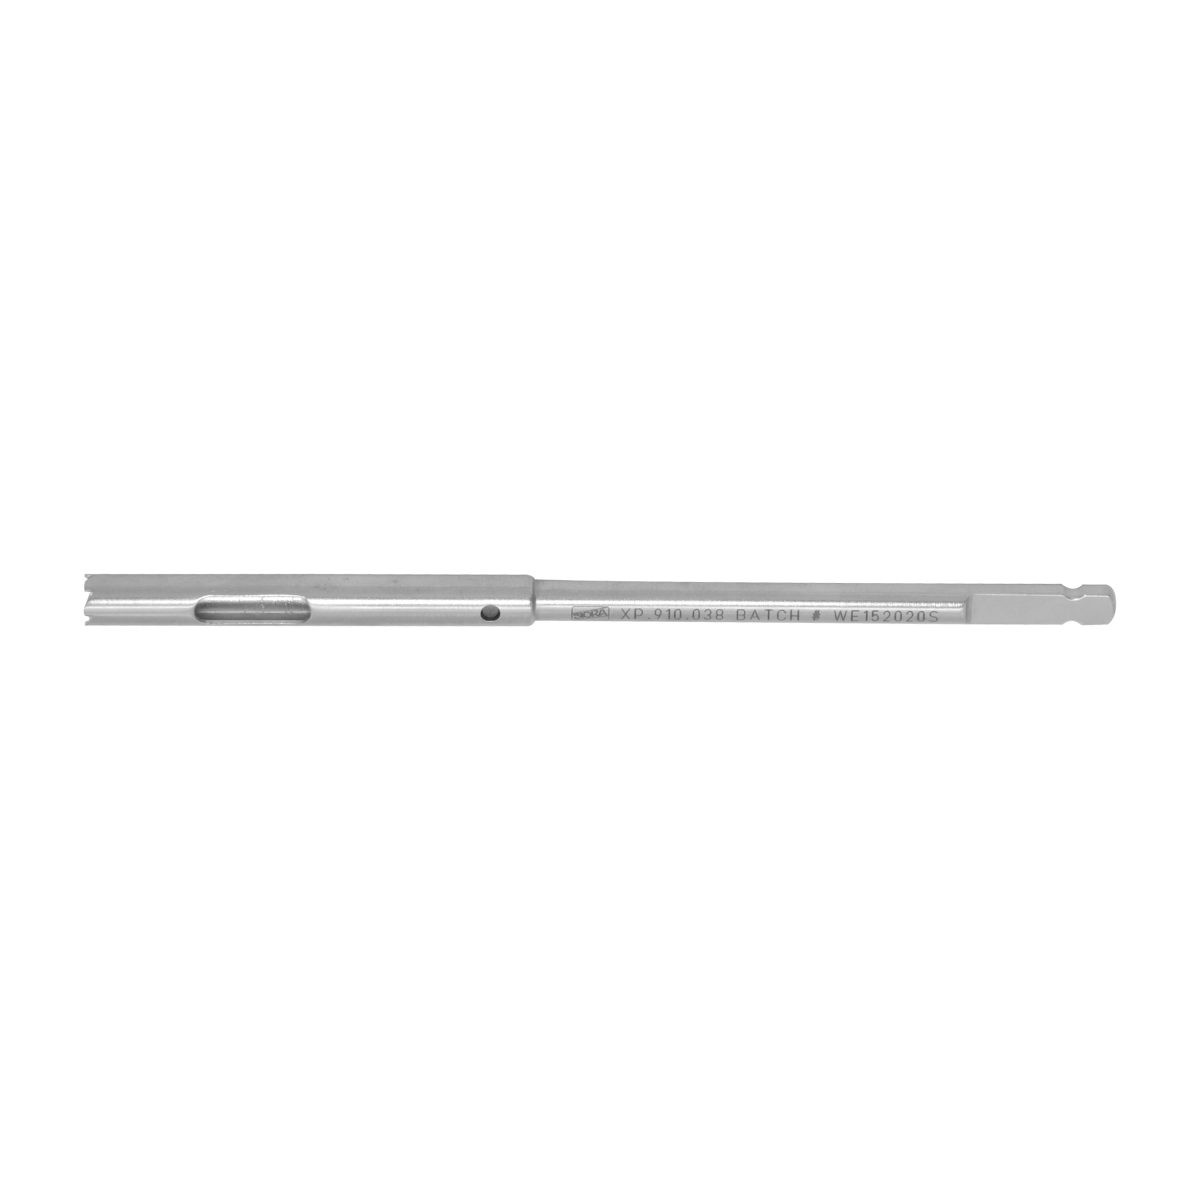 Hollow-Reamer-For-Removal-of-Damage-Screw-For-2.73.54.0mm-Screws-.png